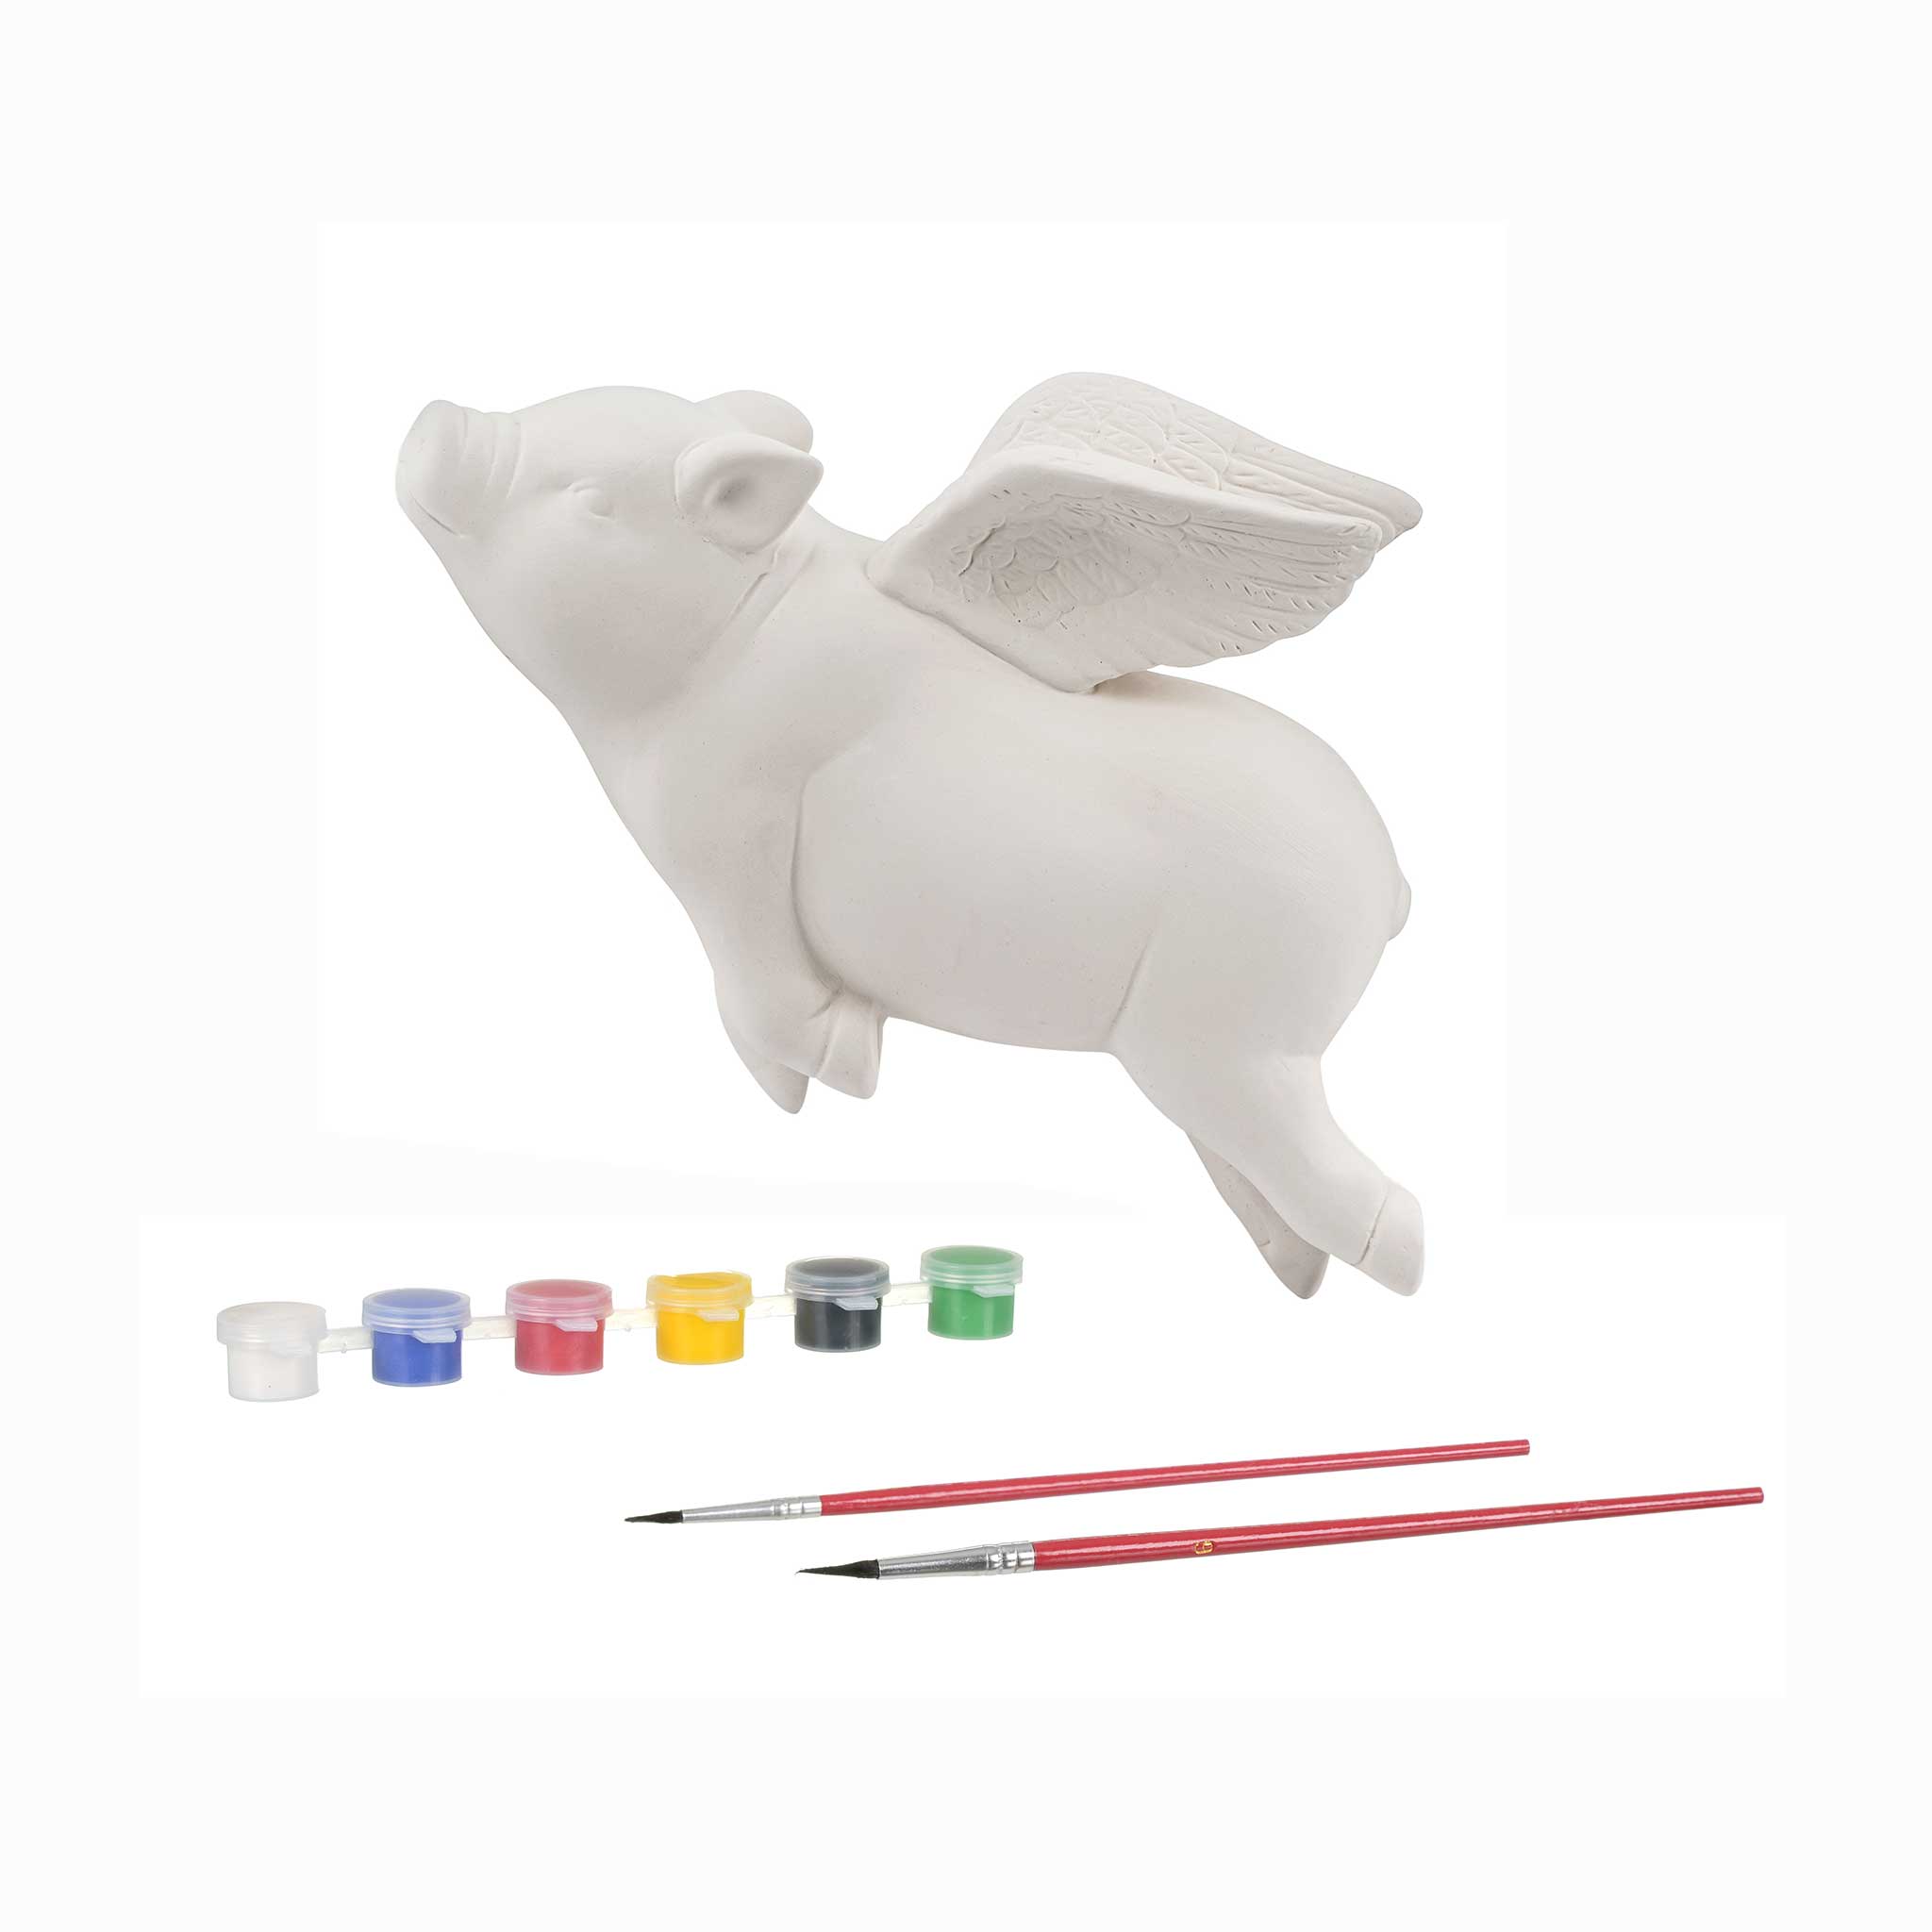 Paint Your Own Ceramic Flying Pig with paint and brushes